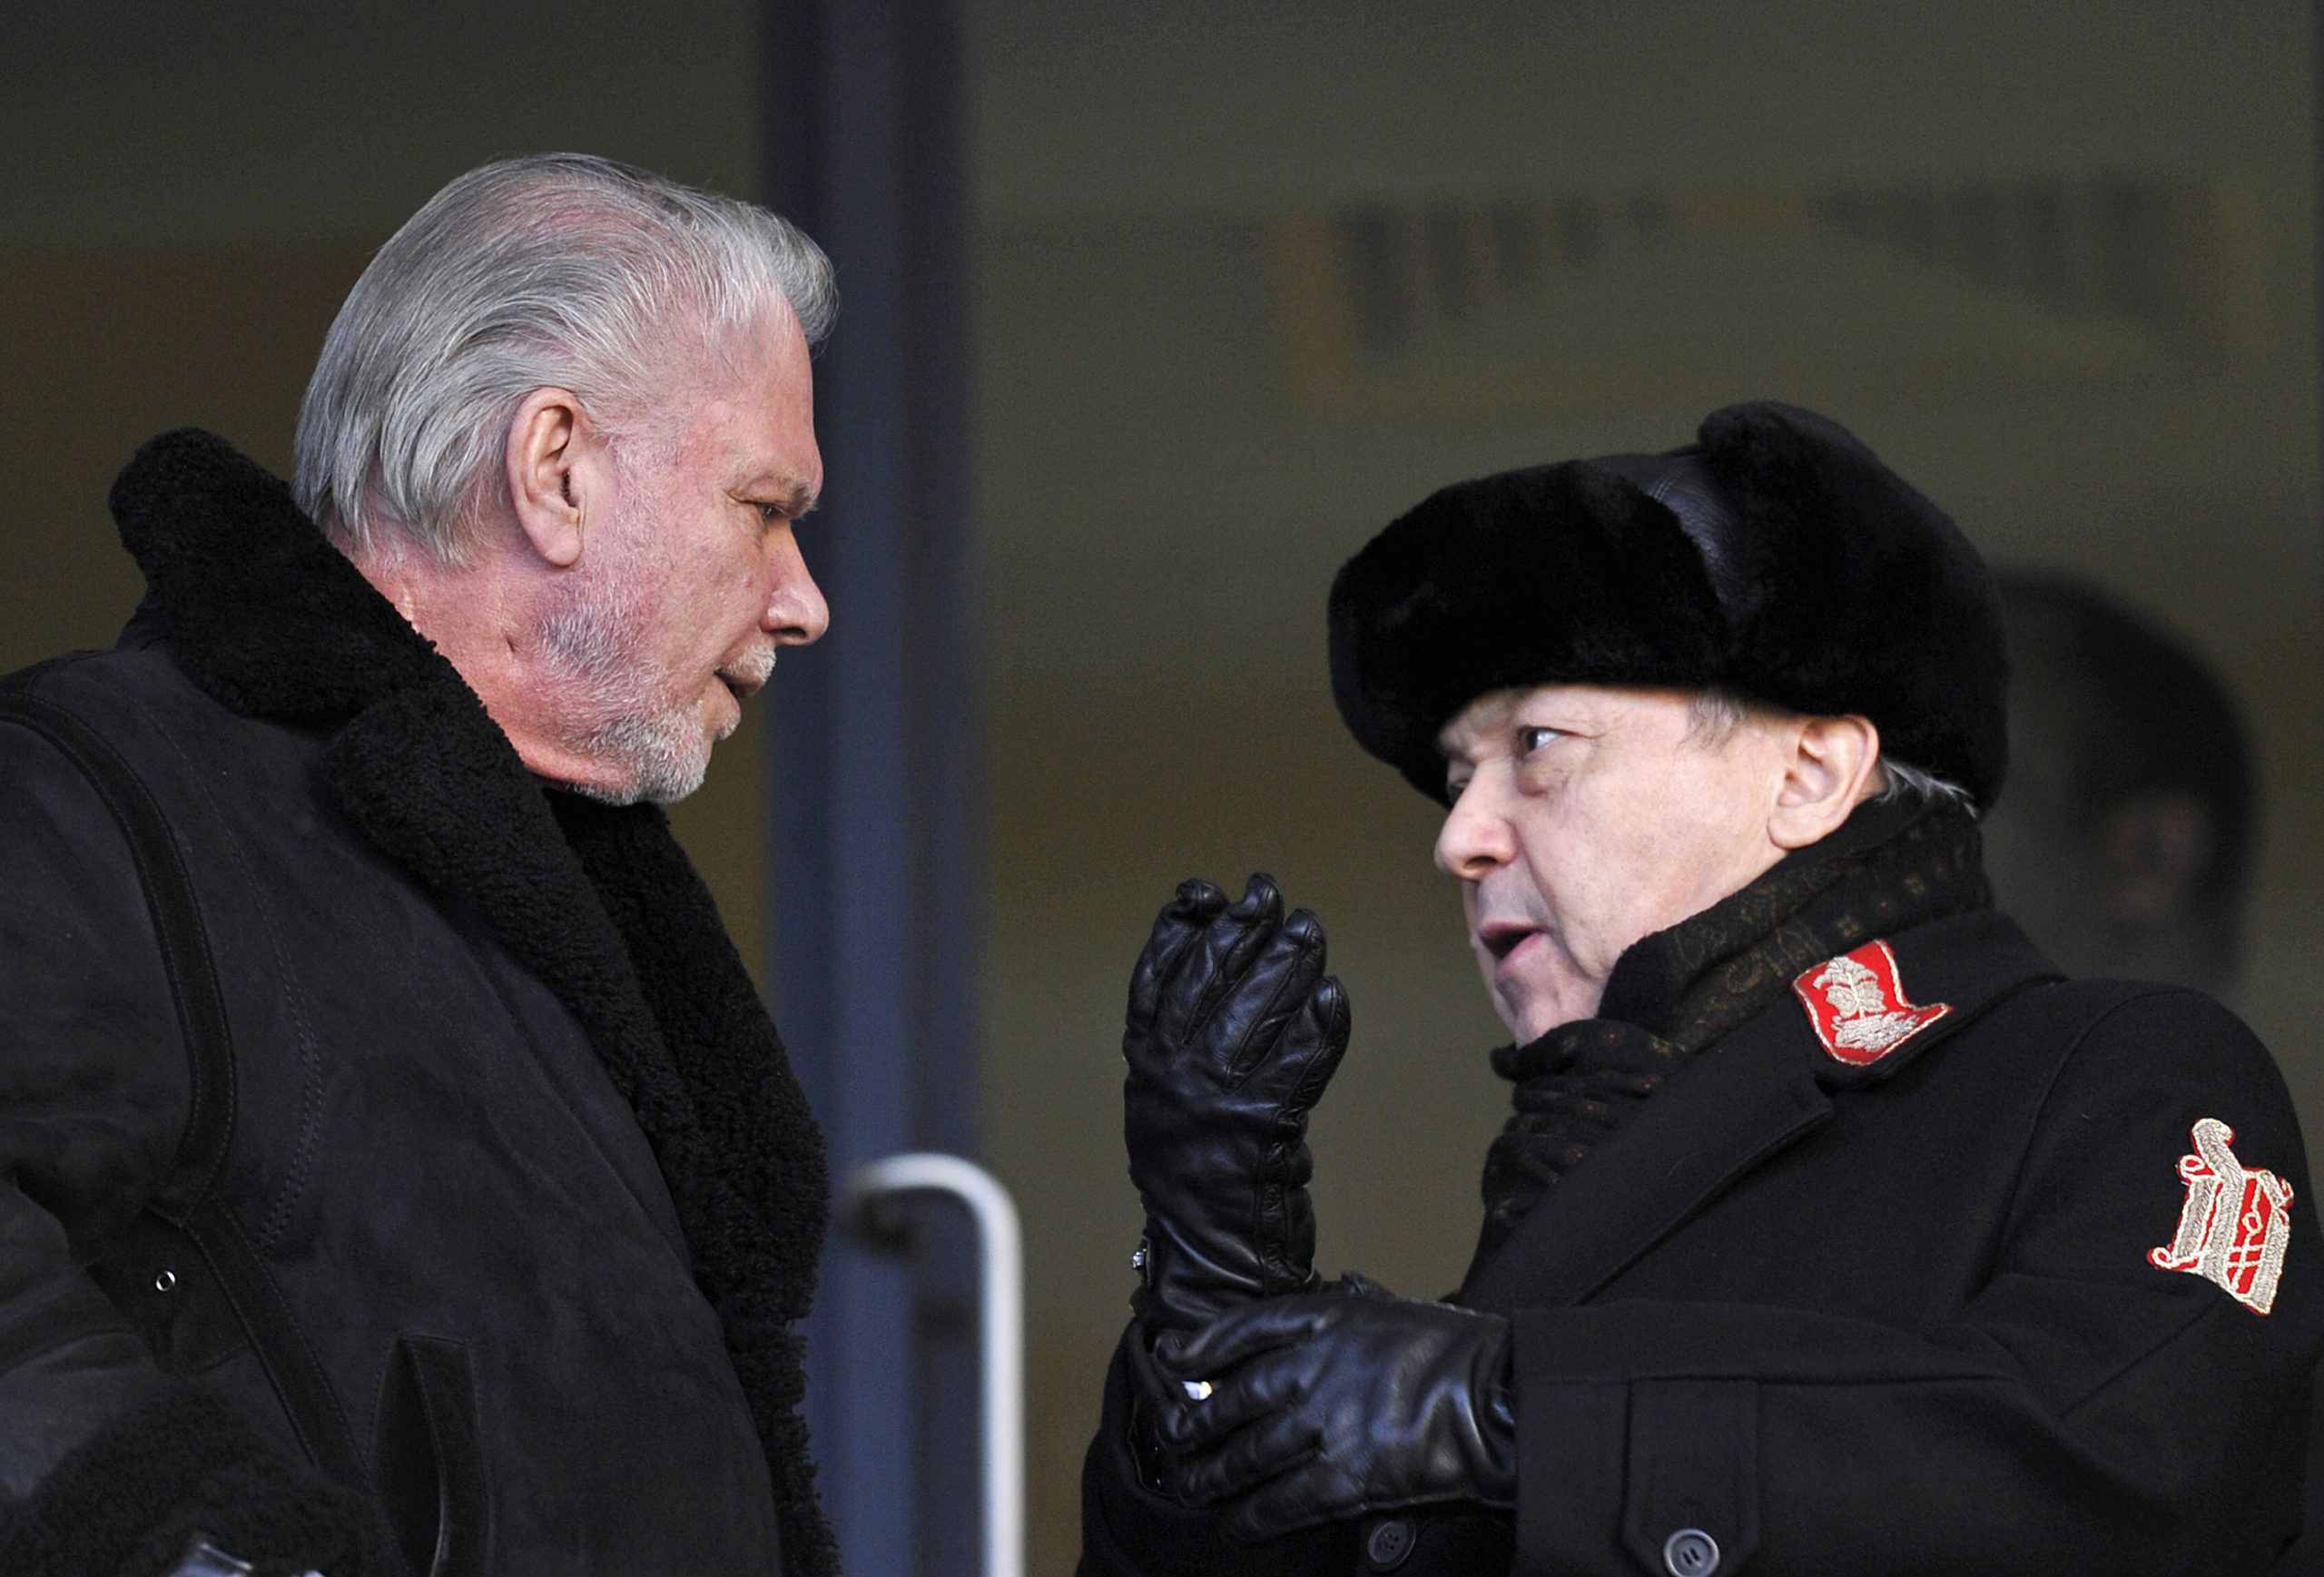 West Ham's co-owners David Gold (L) and